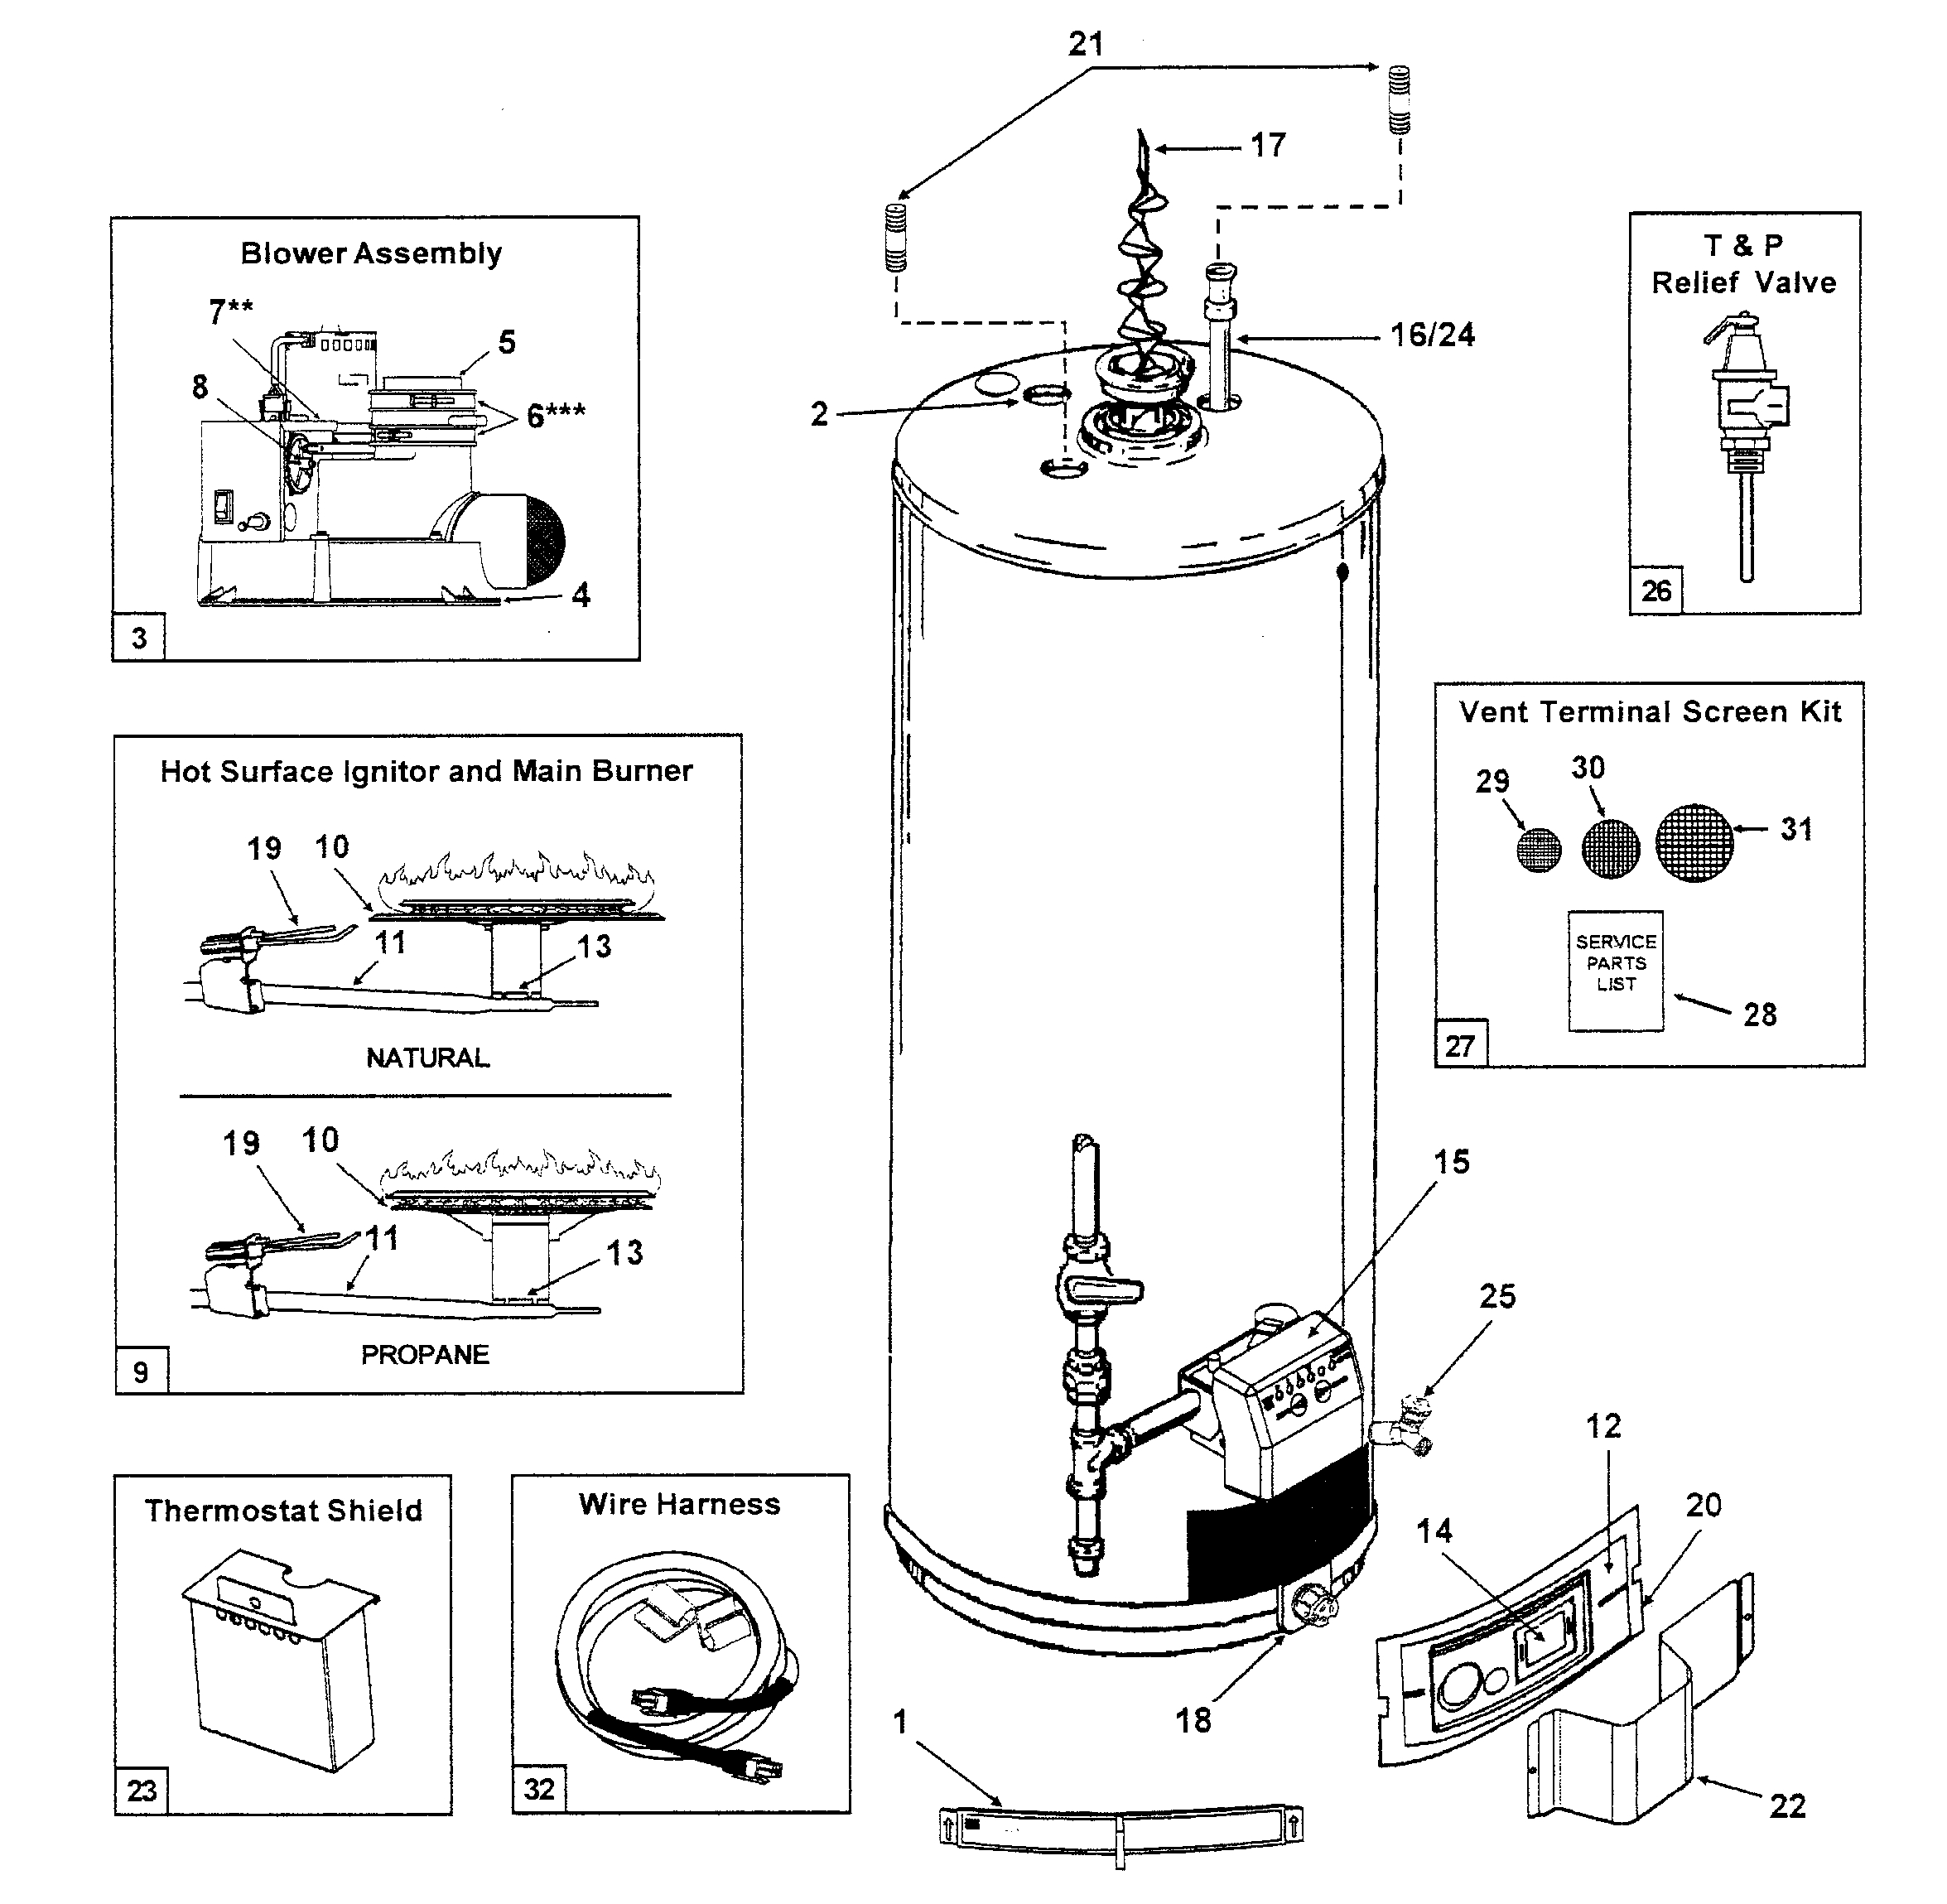 Water Heater Parts Diagram Looking For Reliance Model 640ybvit100 Gas Water Heater Repair